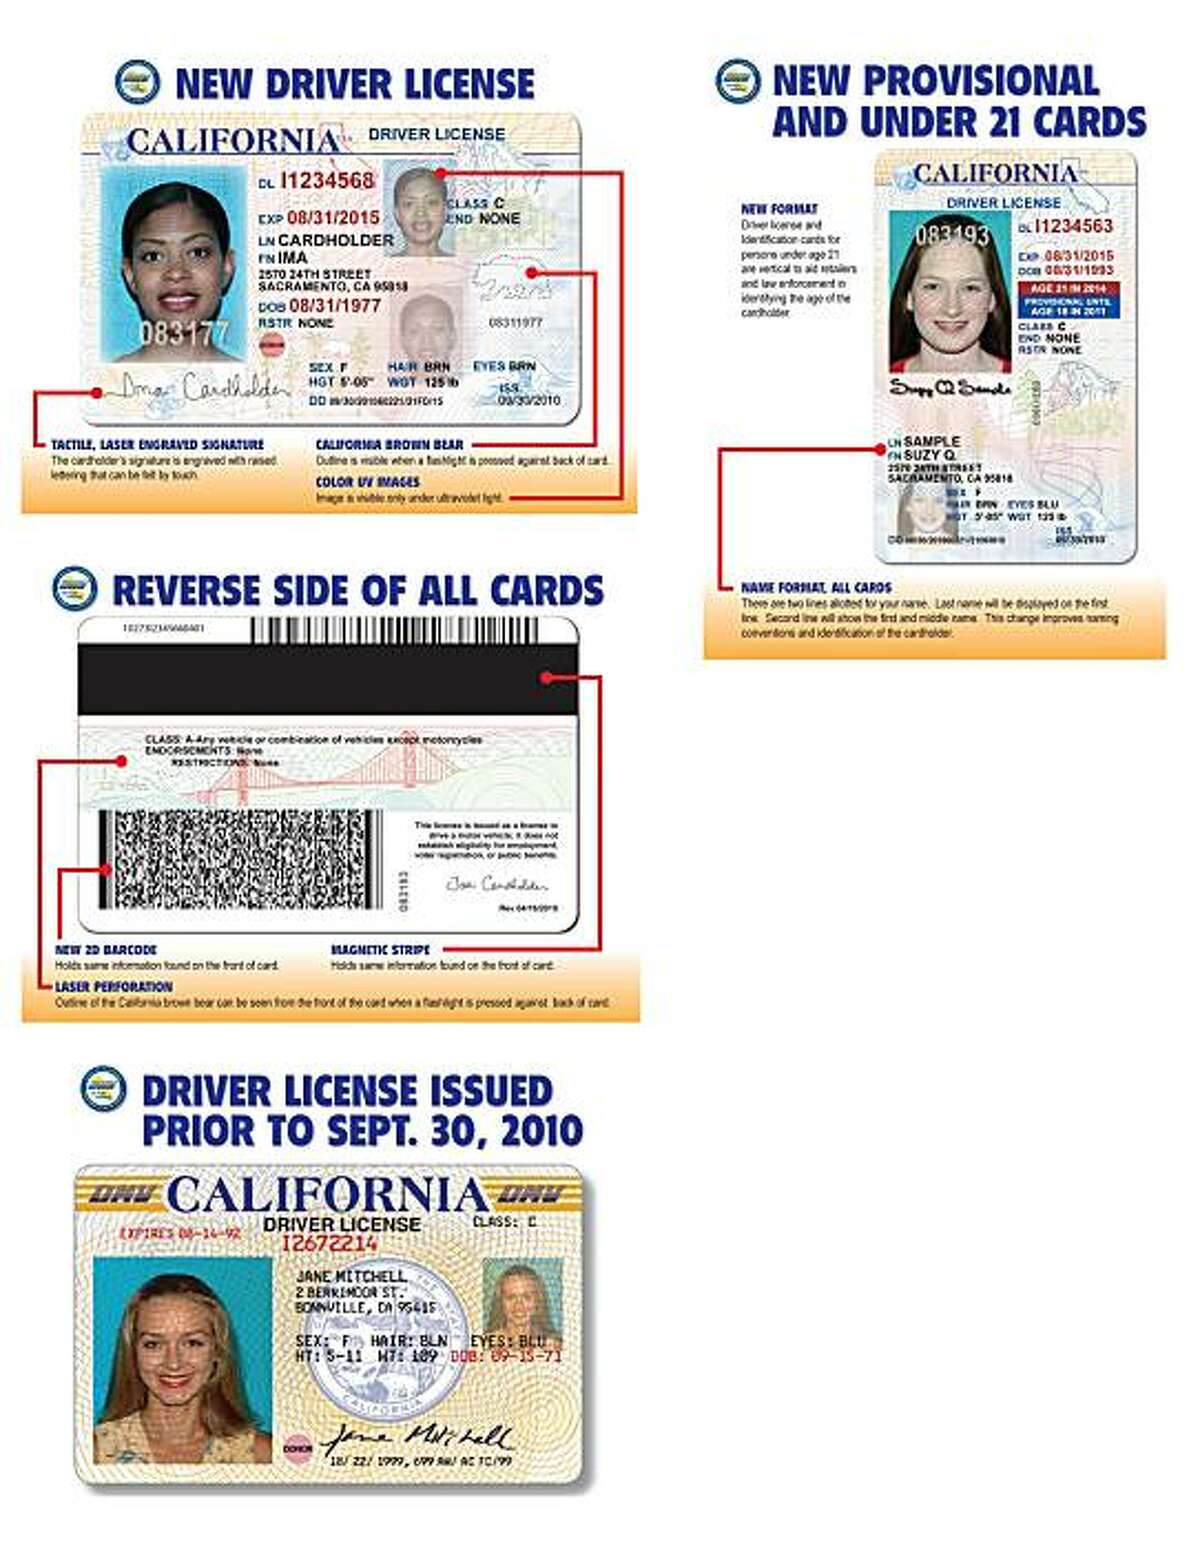 dd on drivers license meaning